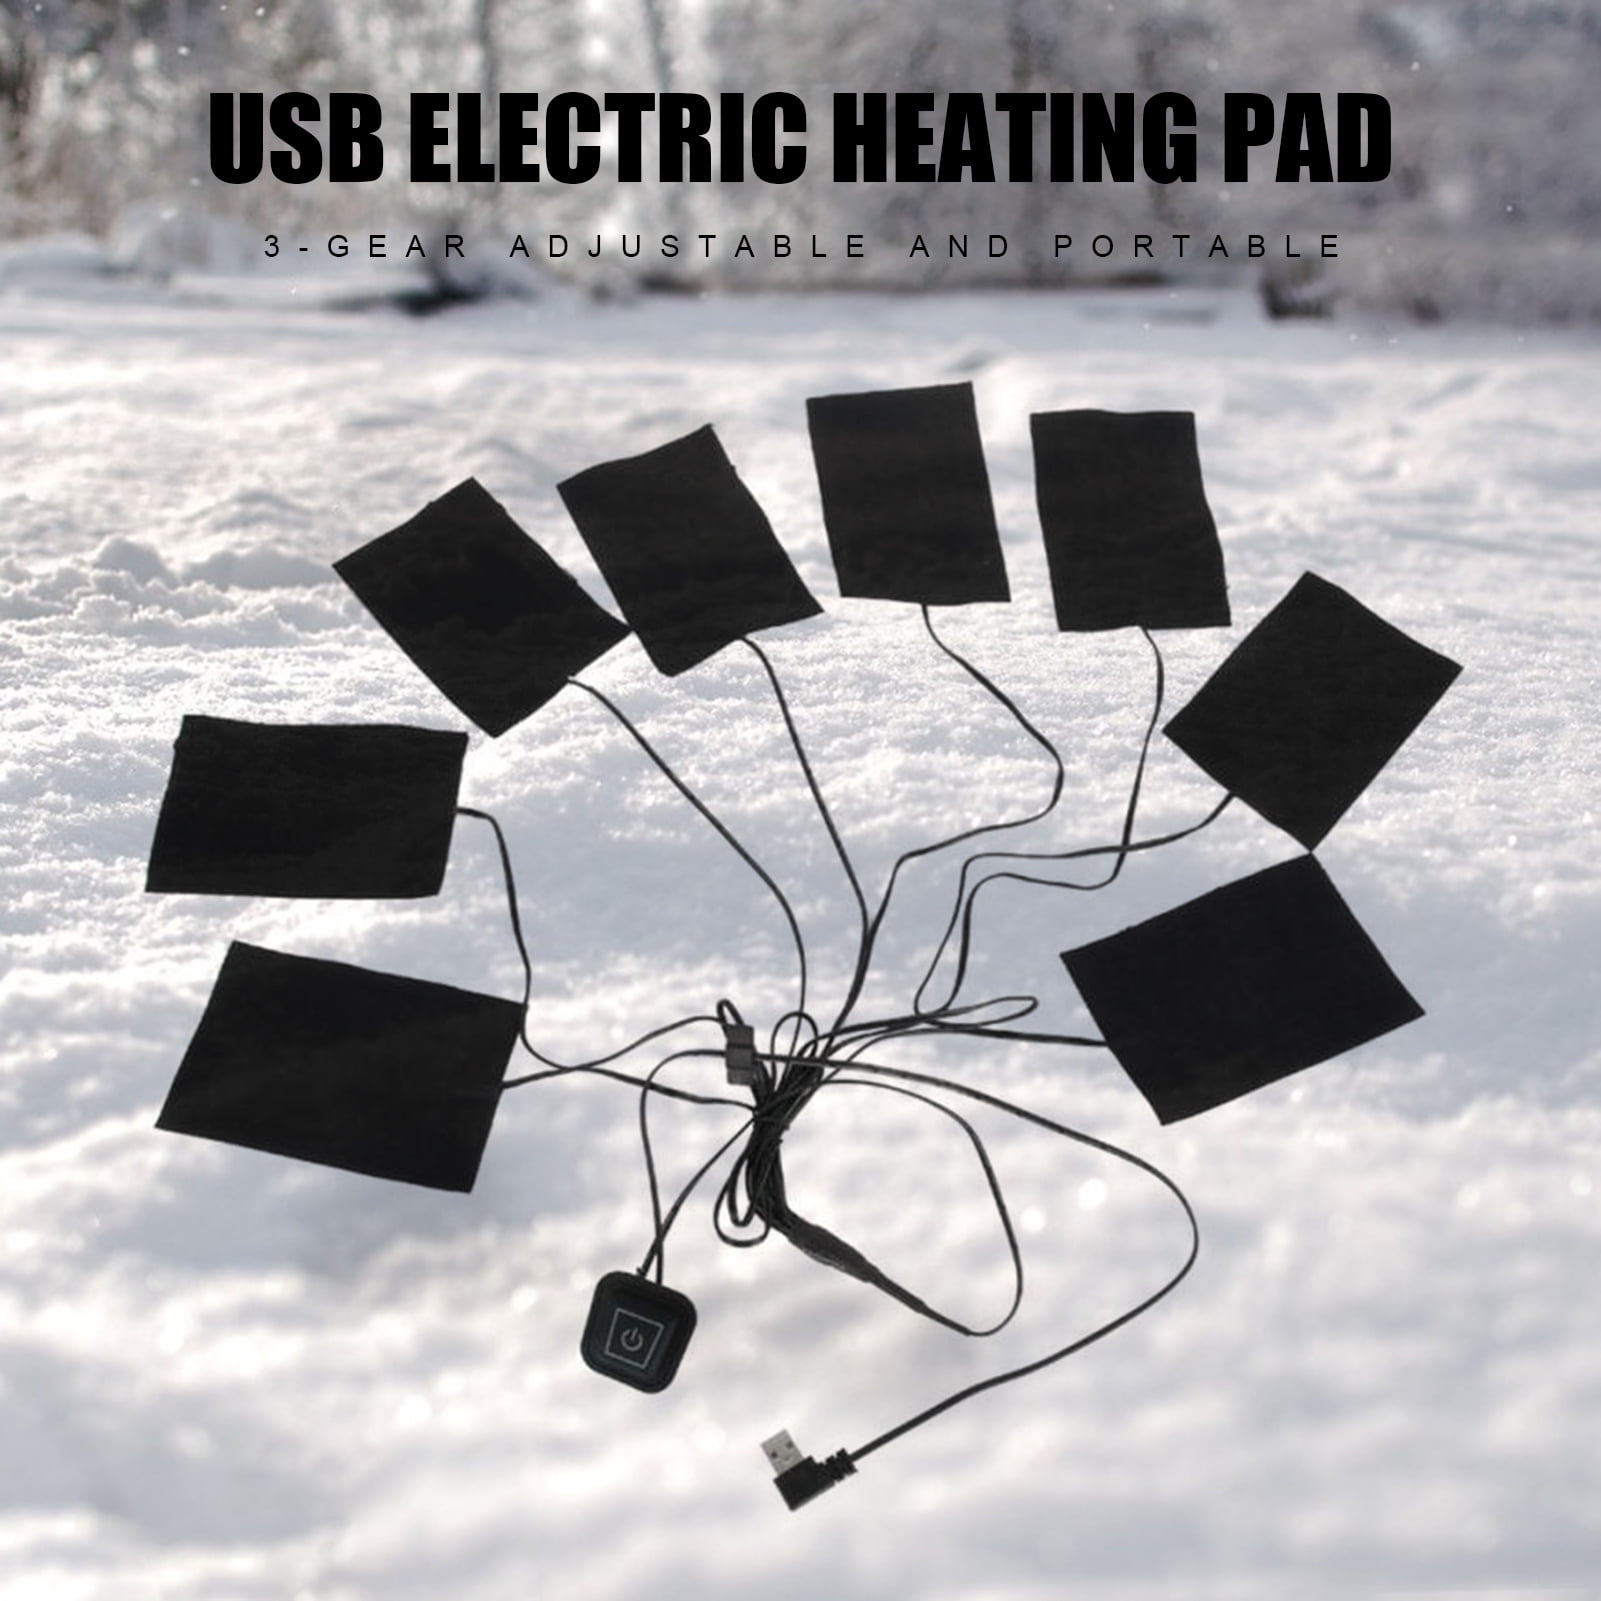 Details about   1Set USB Fiber Heating Pad Portable 3 Gear Adjustable Temperature Warmer Pa Y1 